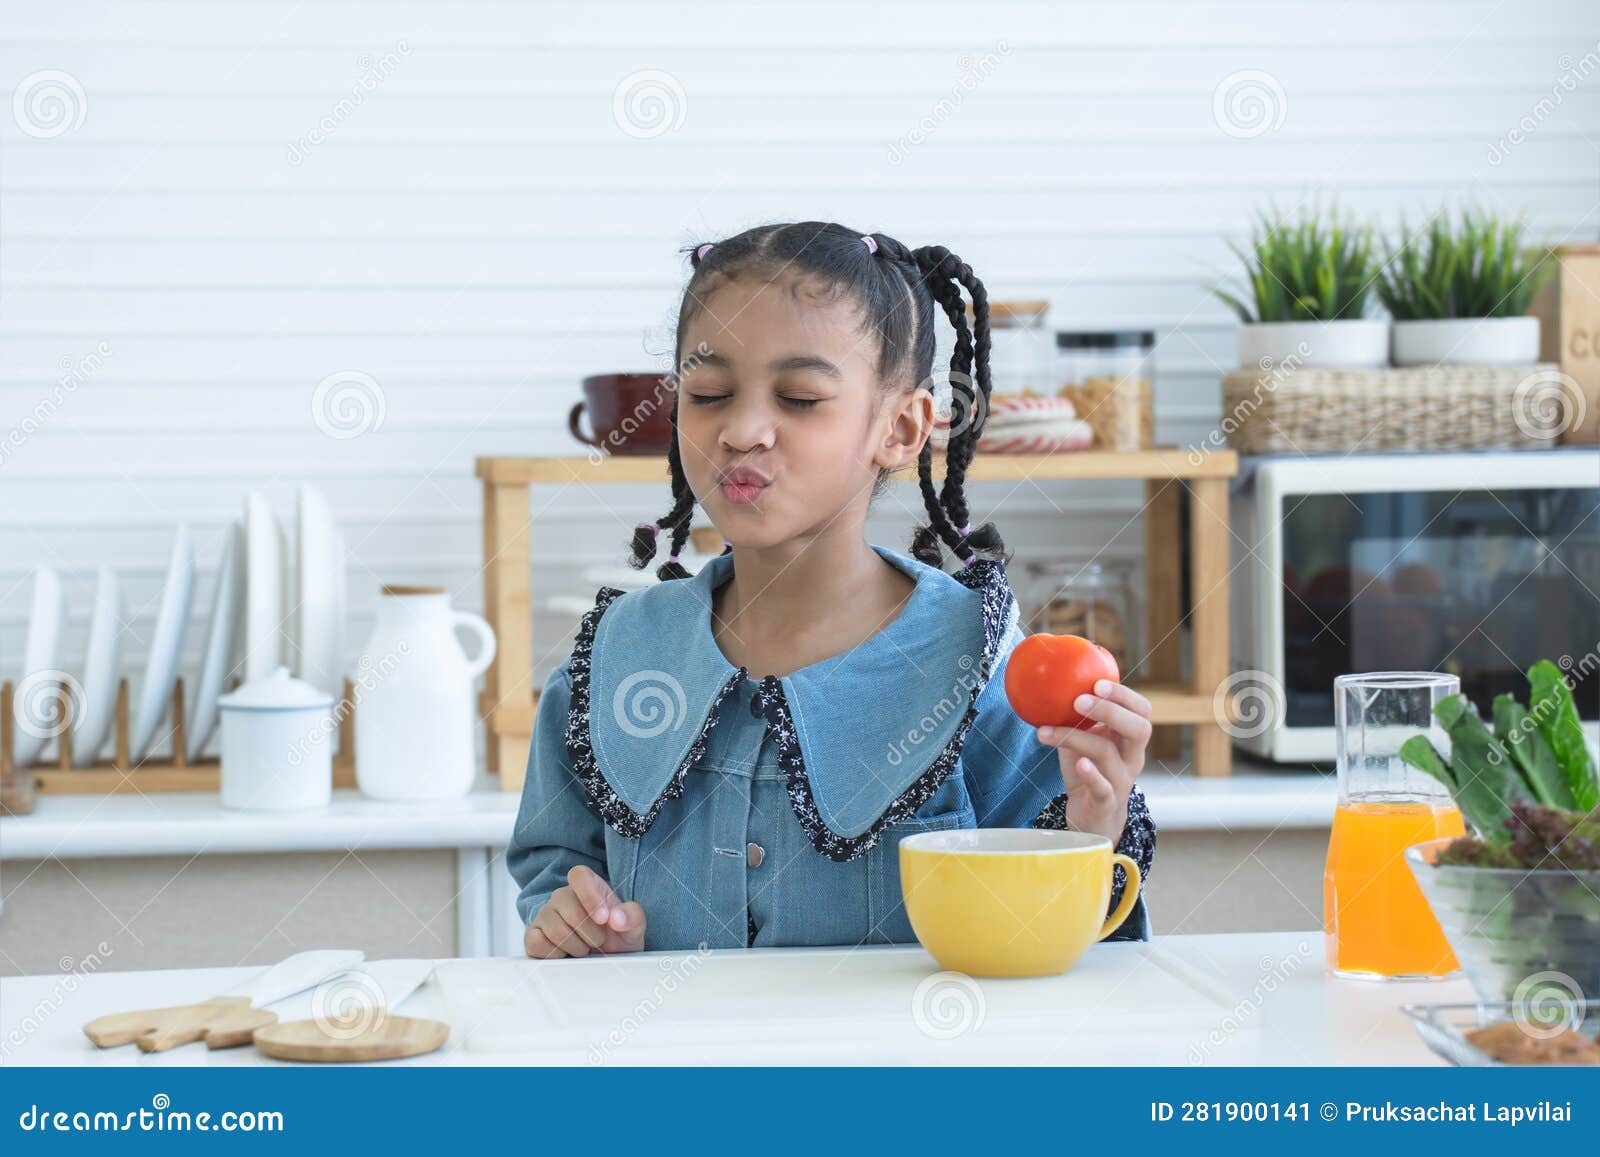 african little kid girl having fun with food and vegetables at kitchen, holding tomato, make a pucker lips, kissing. cute child